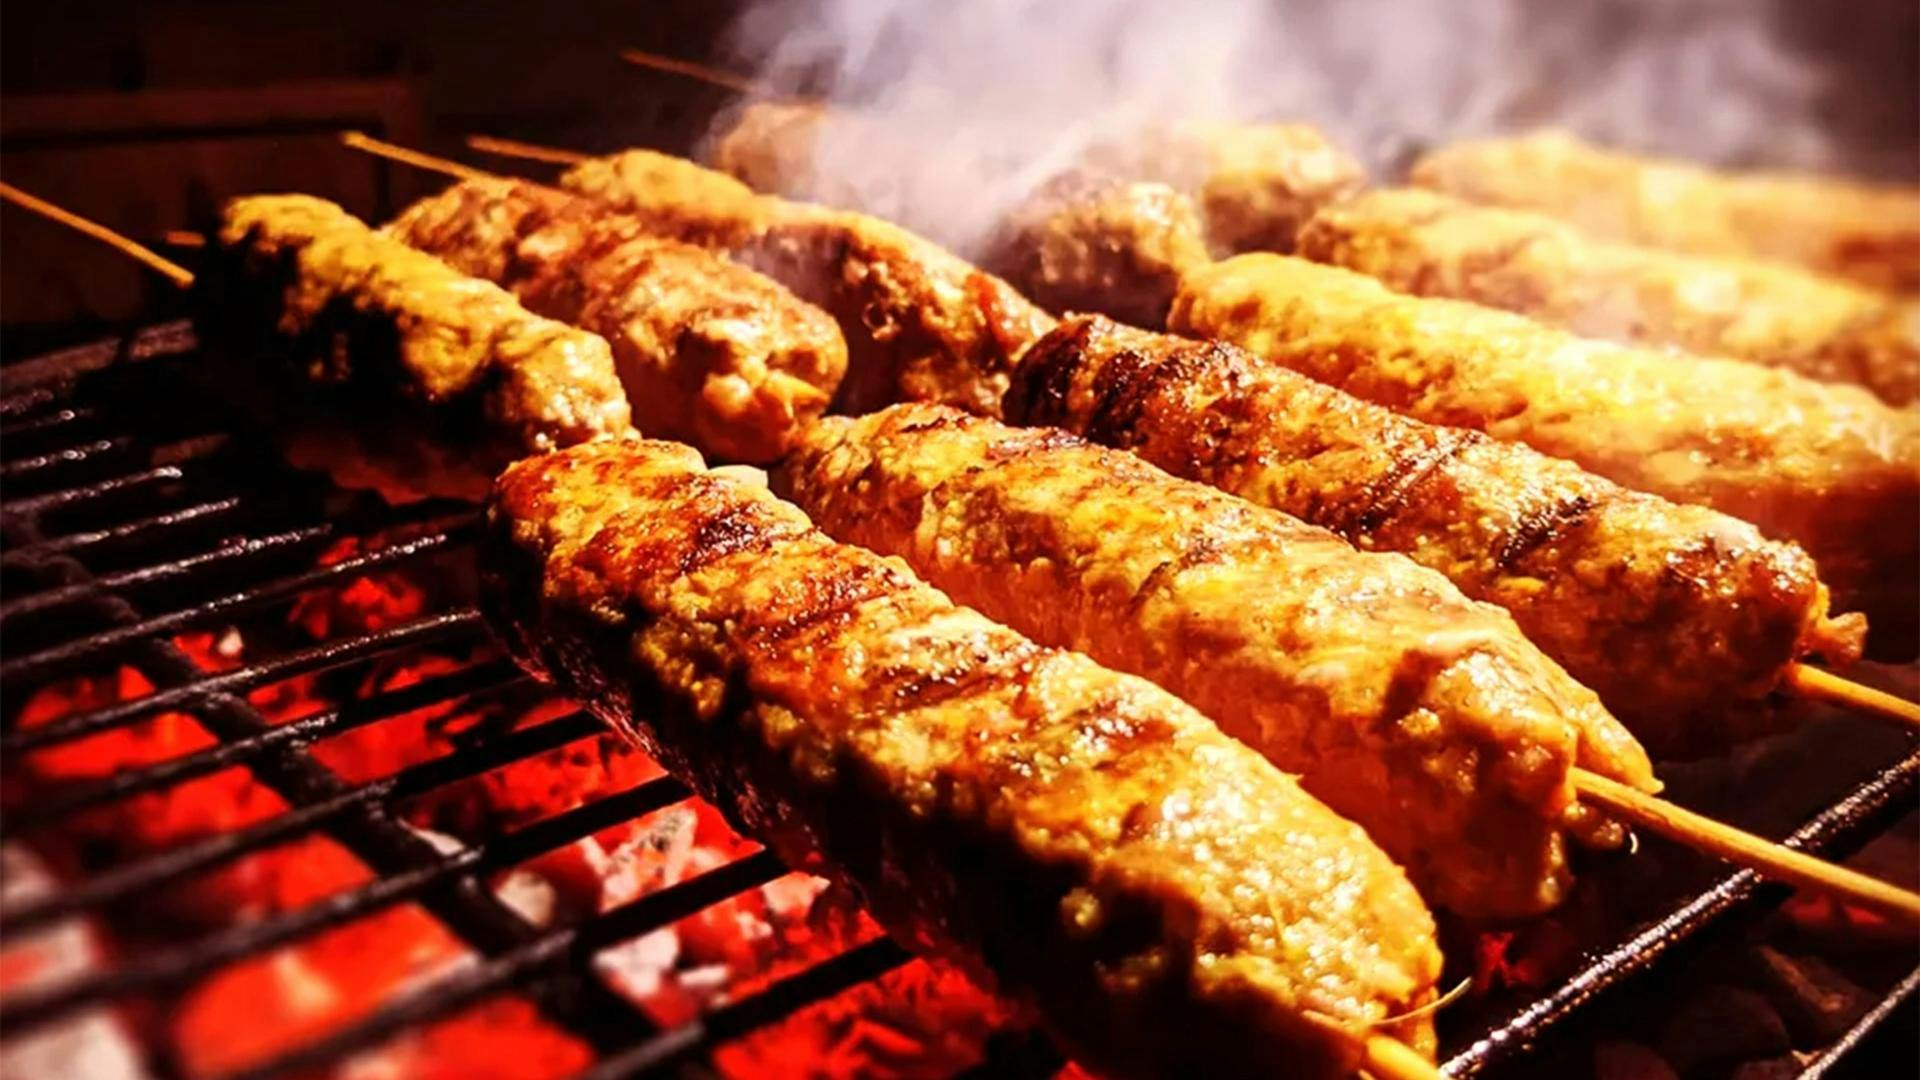 Meat skewers on a grill with red hot coals and smoke